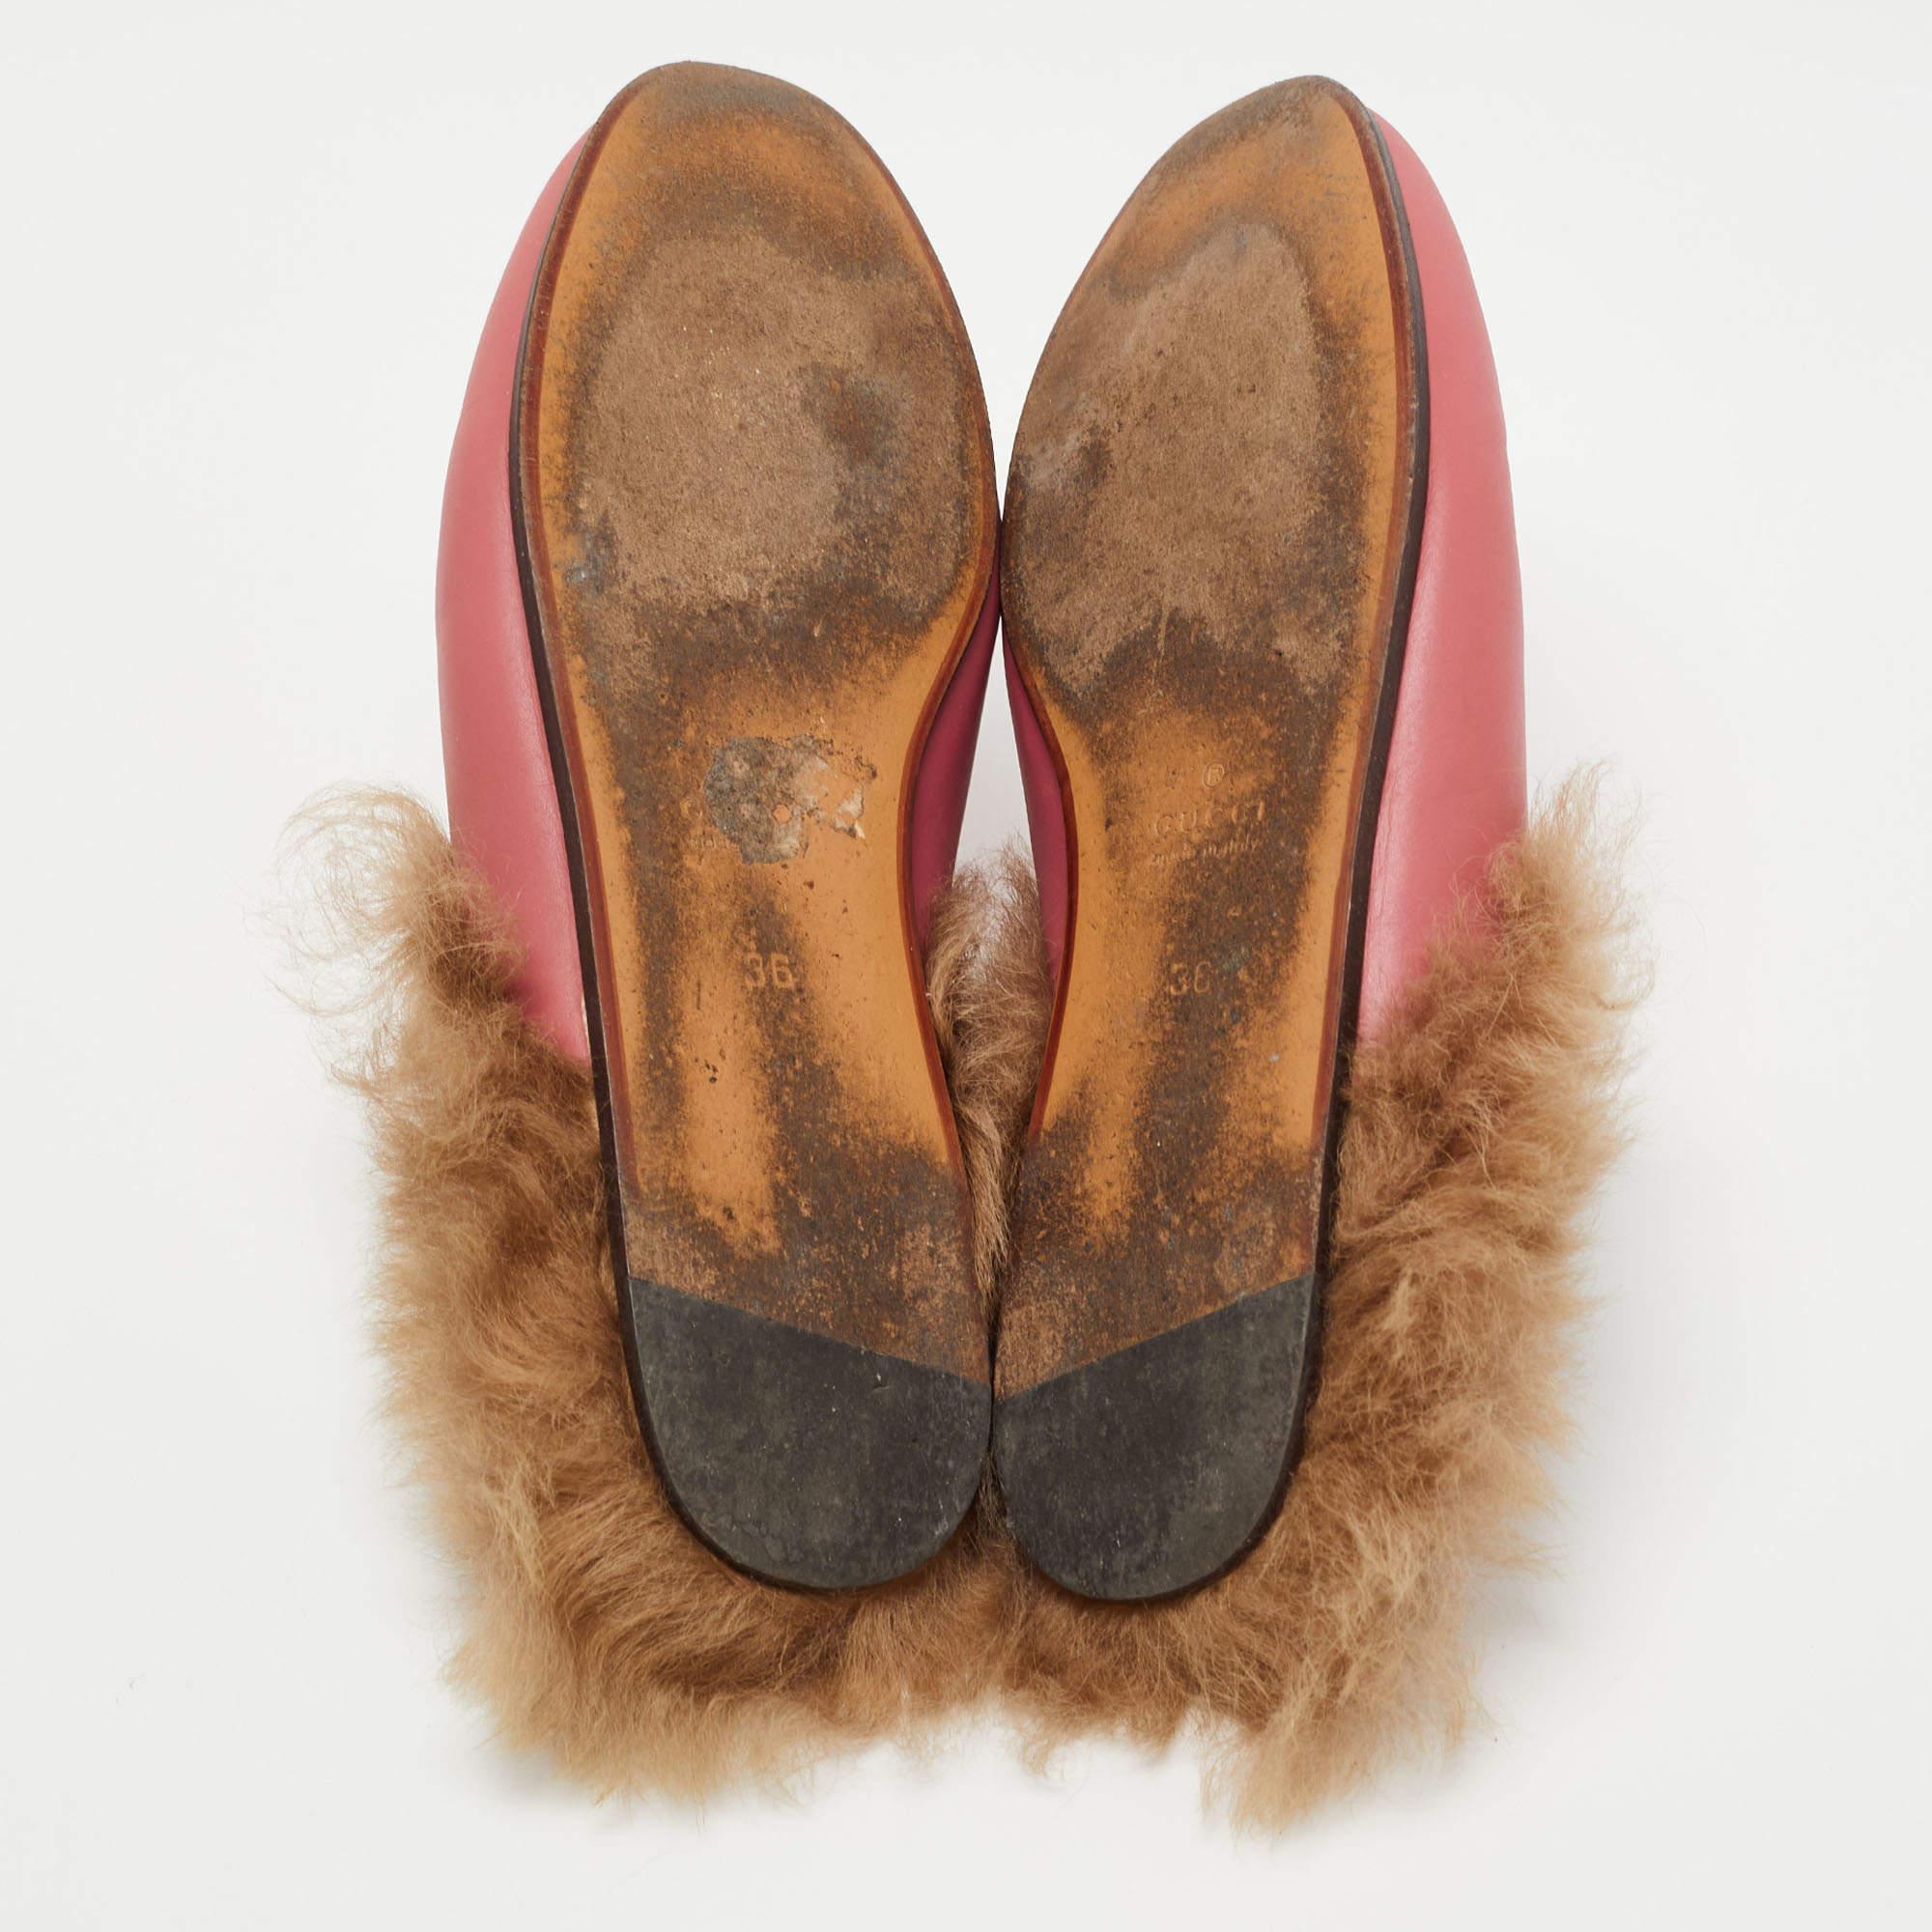 Gucci Prink Leather and Fur Princetown Mules Size 36 3